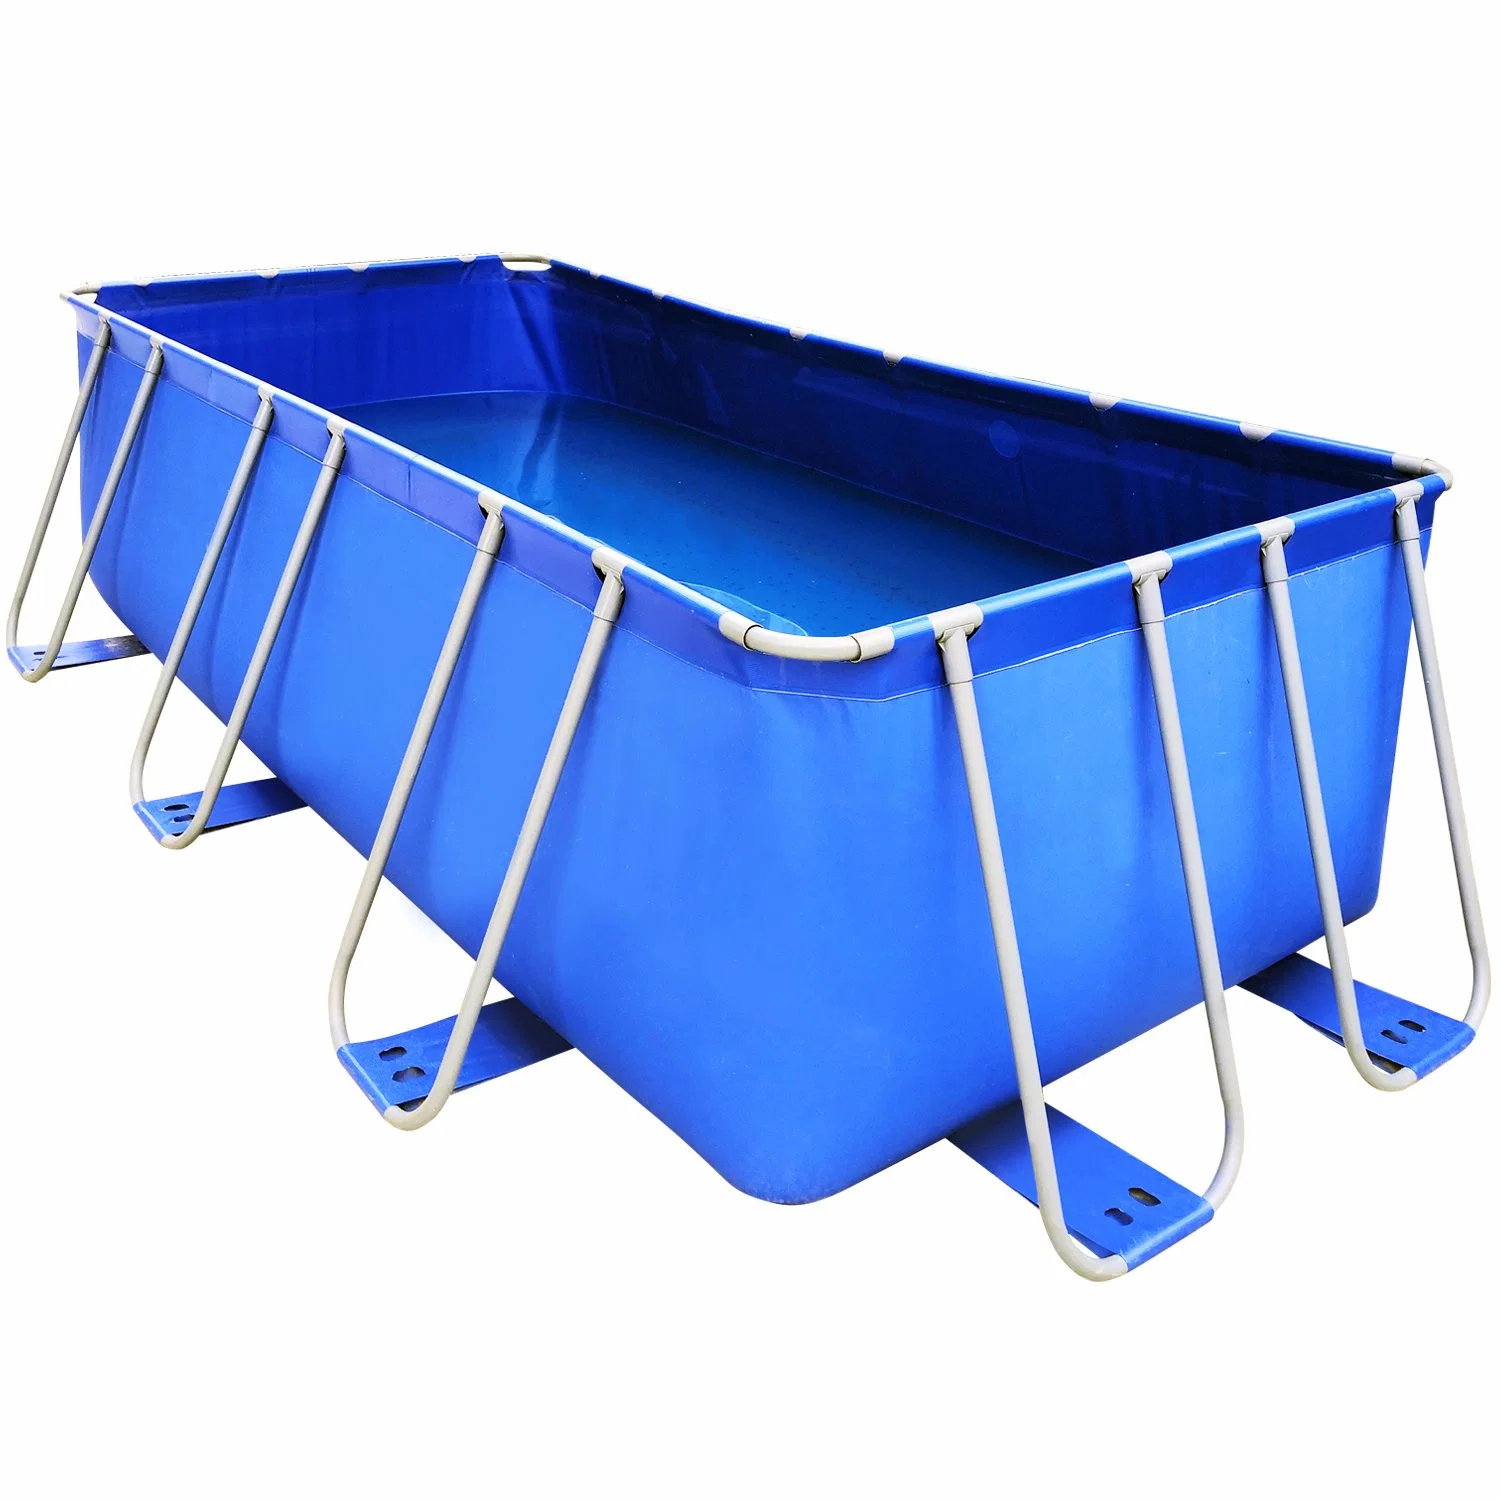 Dfaspo Above Ground Garden Outdoor Indoor Inflatable Swim Pool Round/ Square PVC Swimming Pool Pot Jar Easy to Set with Filter and Ladder